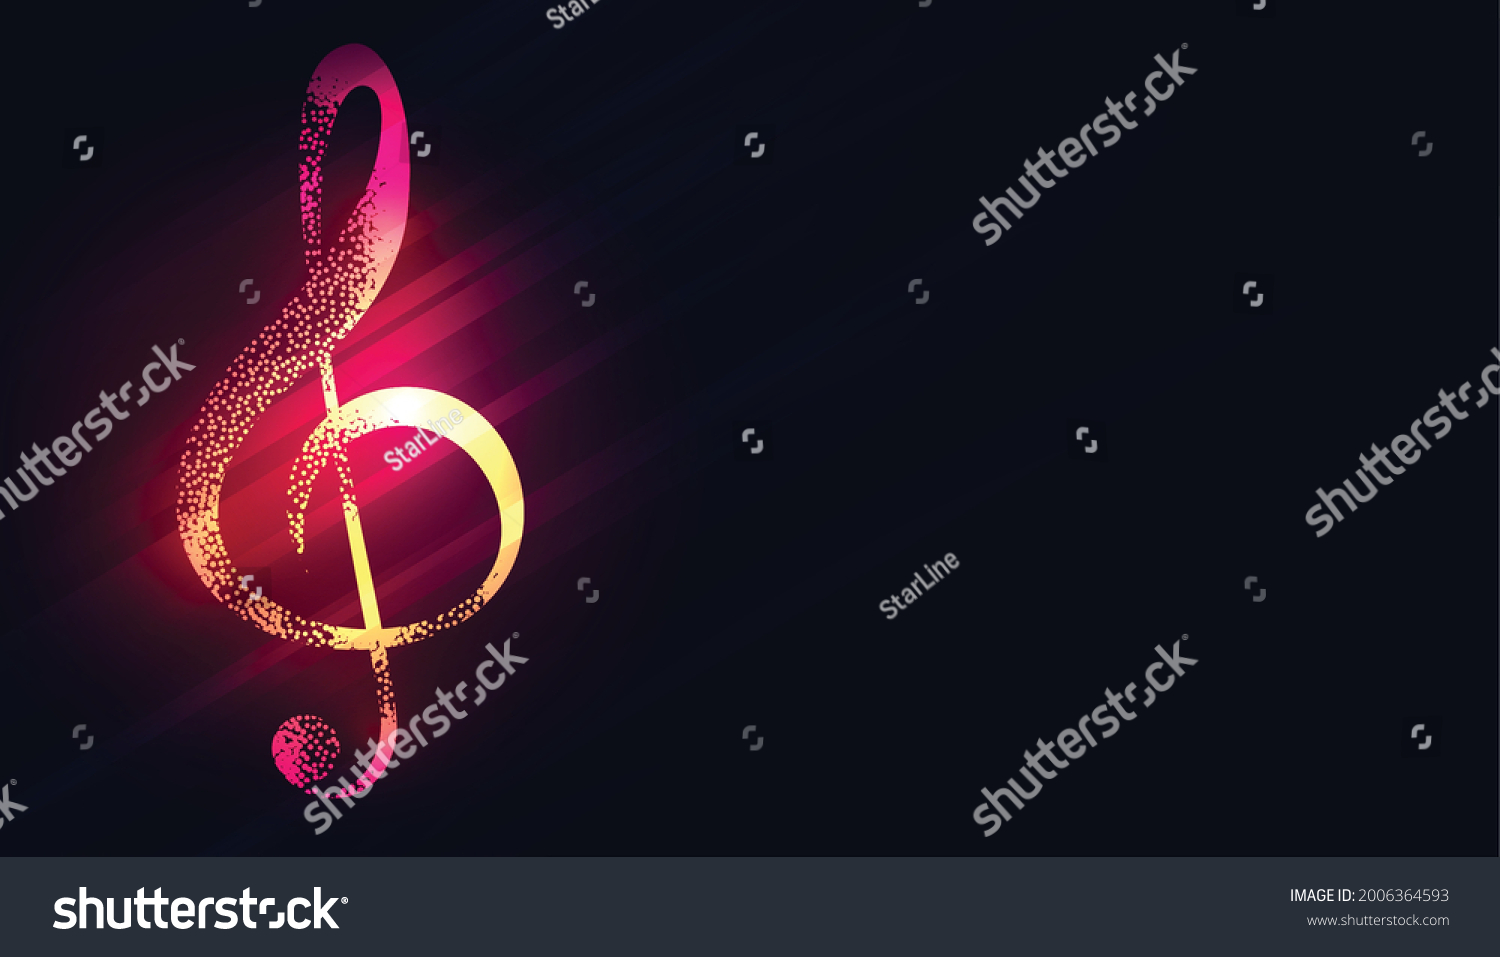 Glowing Shiny Musical Notes Background Design Stock Vector Royalty